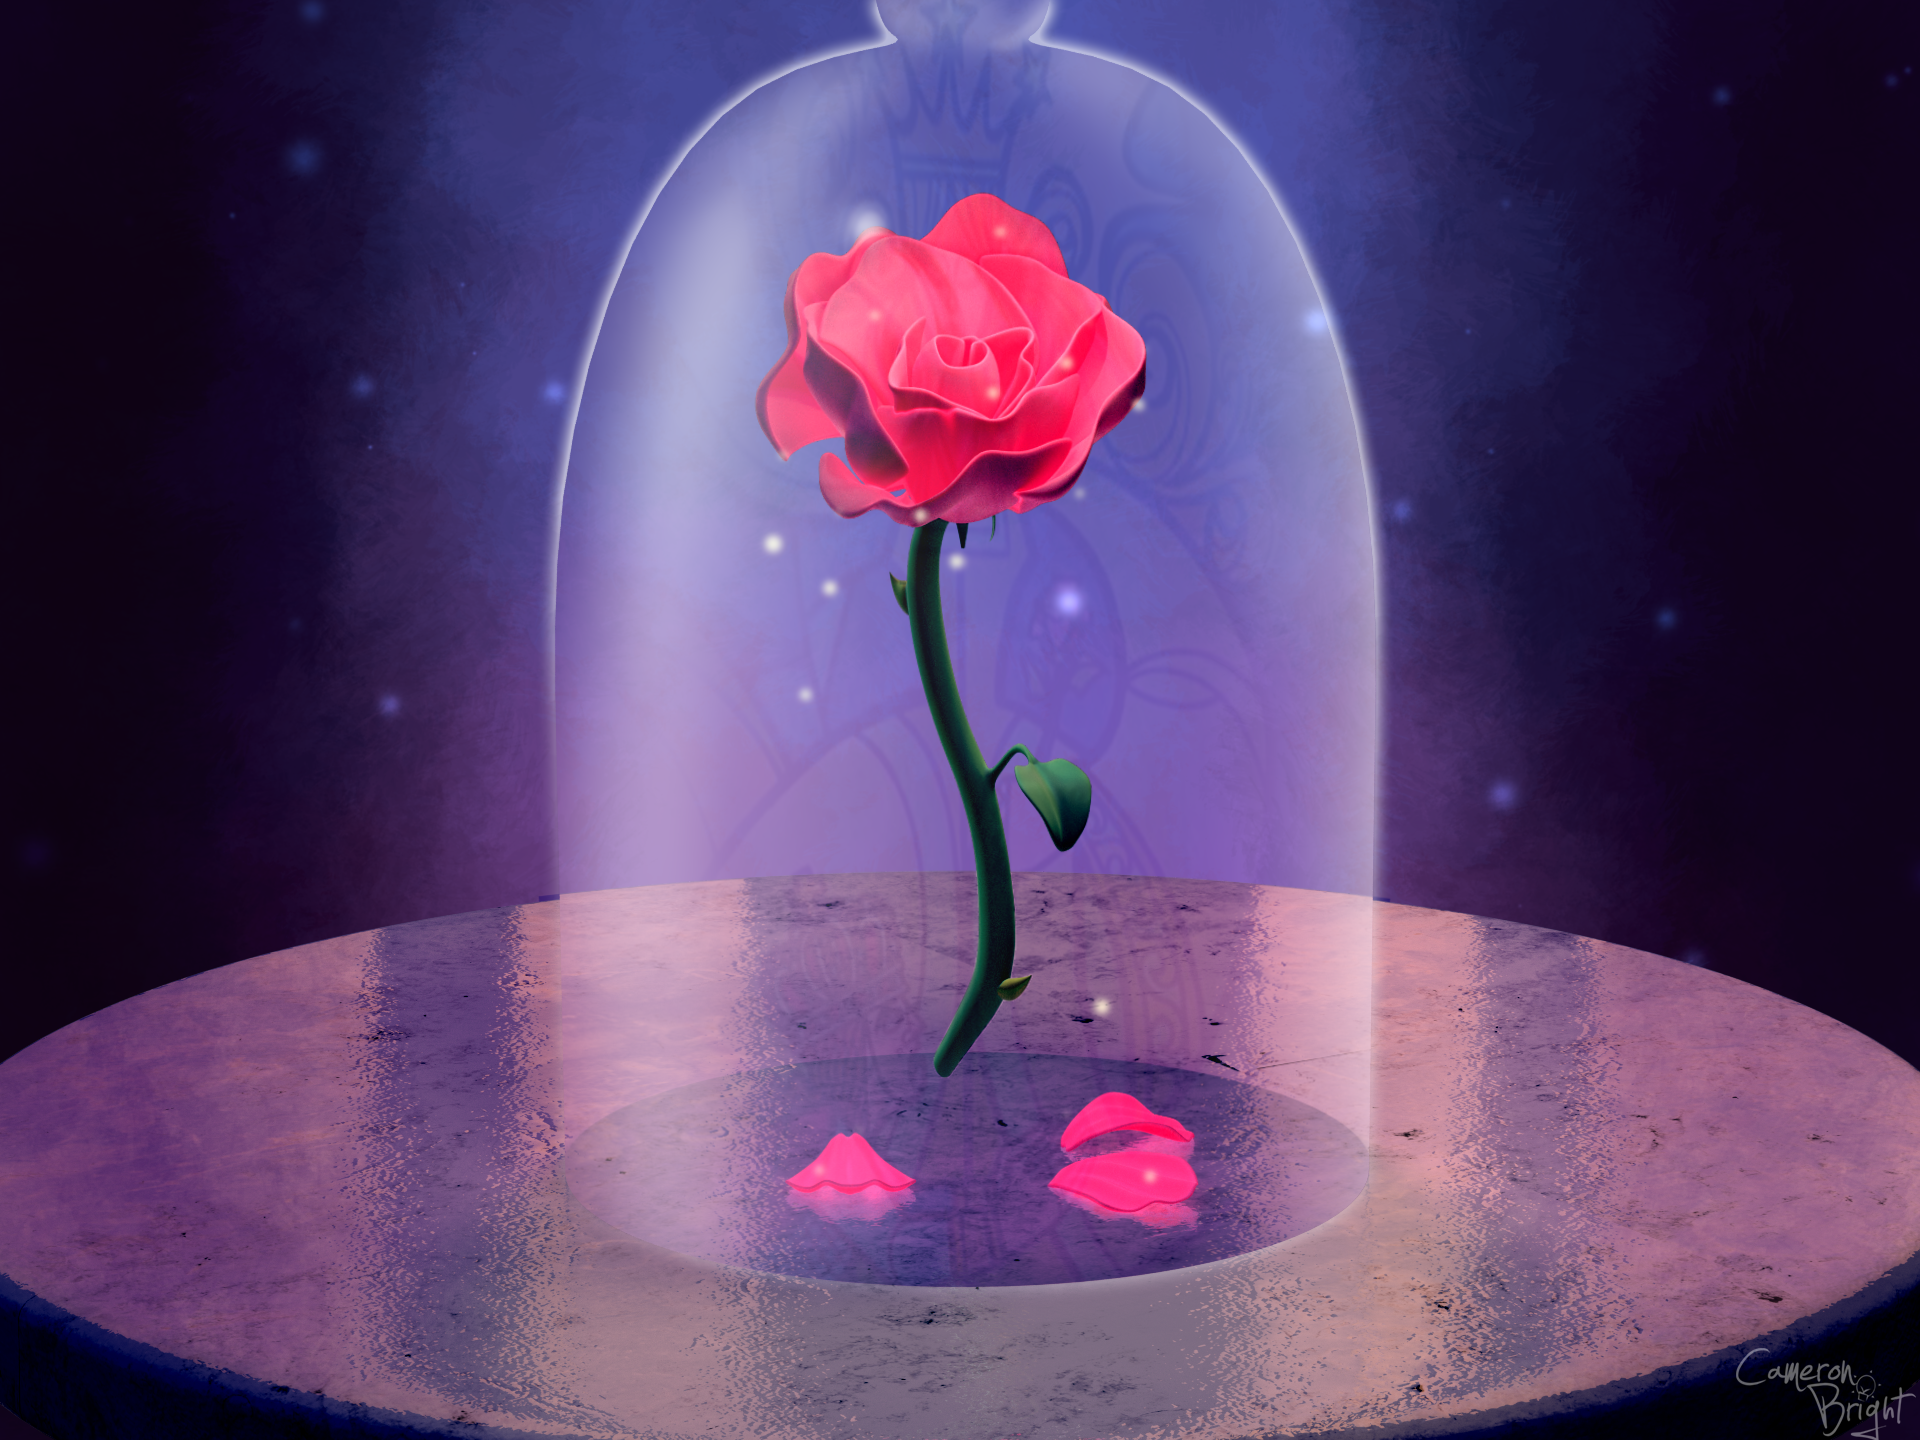 Beauty And The Beast Movie Pink Pink Rose Rose 1920x1440